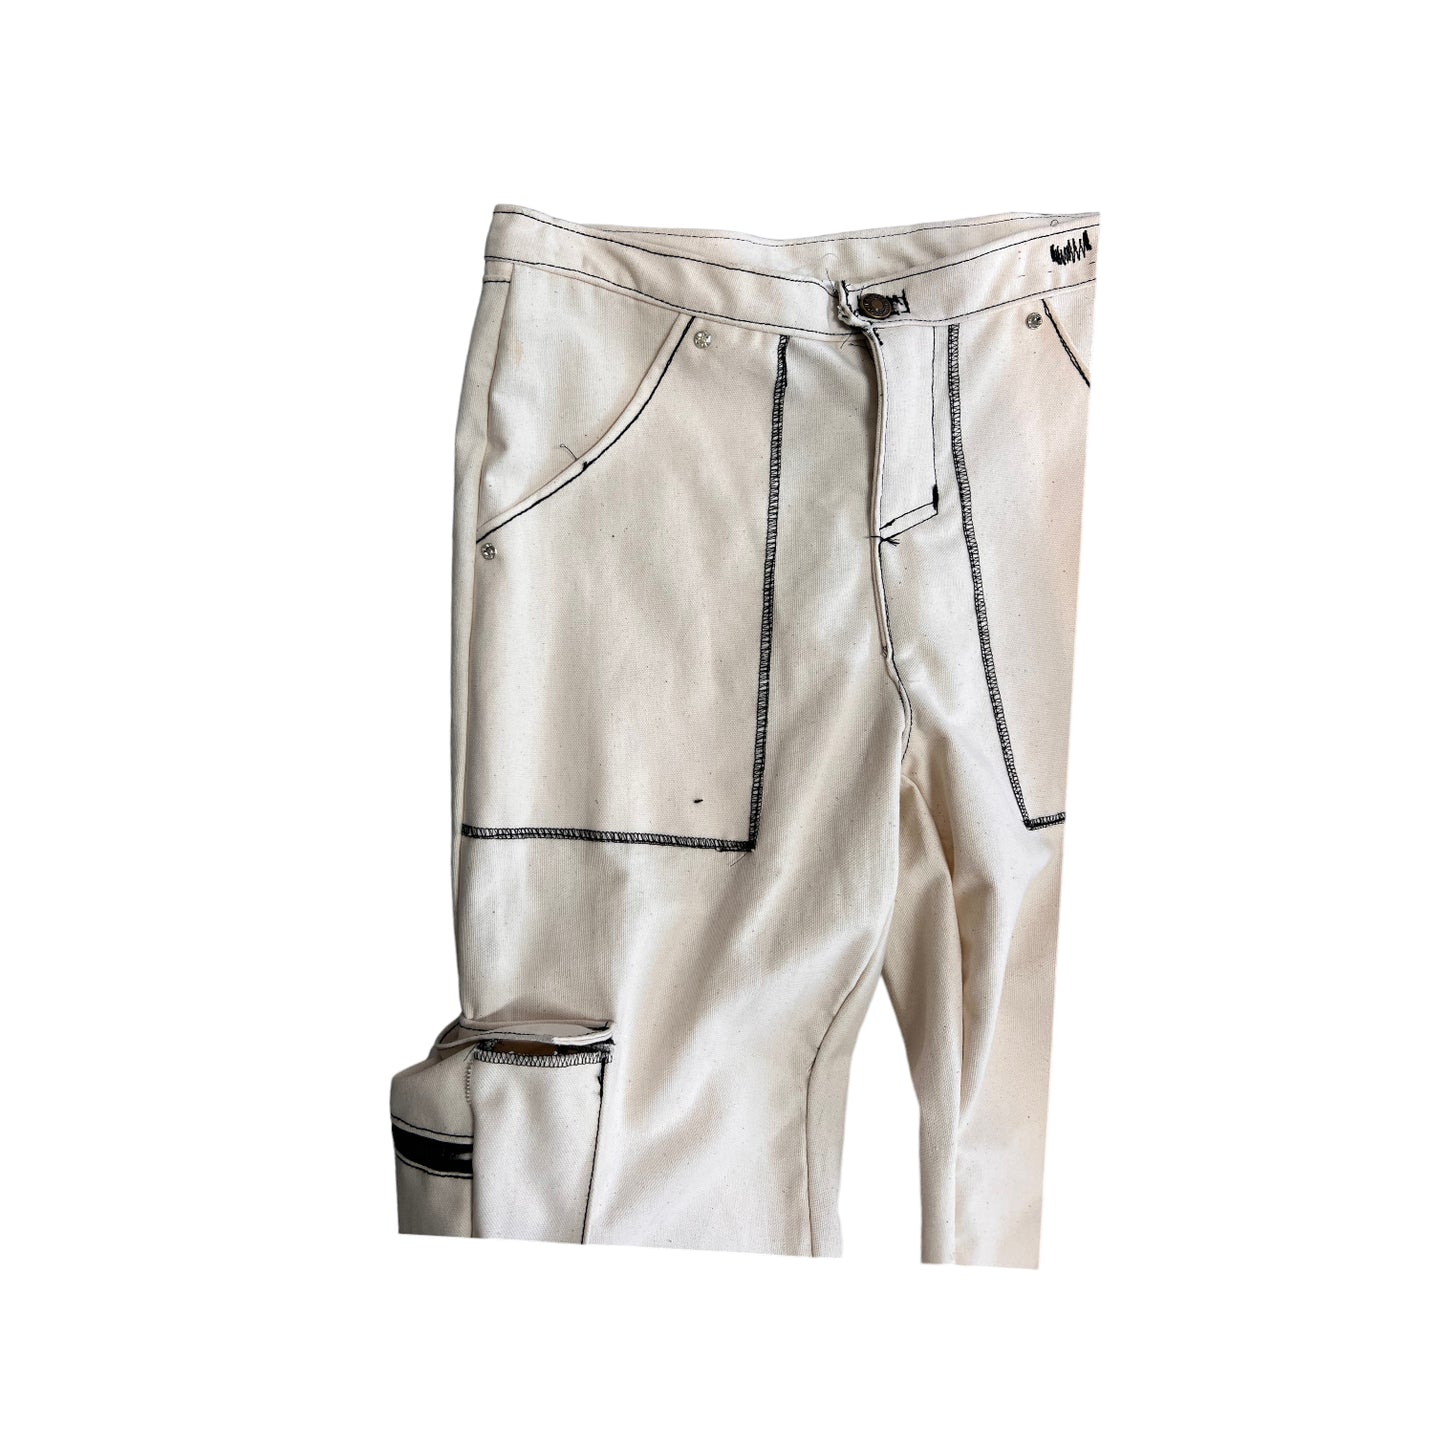 Toth 660 RAW lite Canvas Cargo Pants